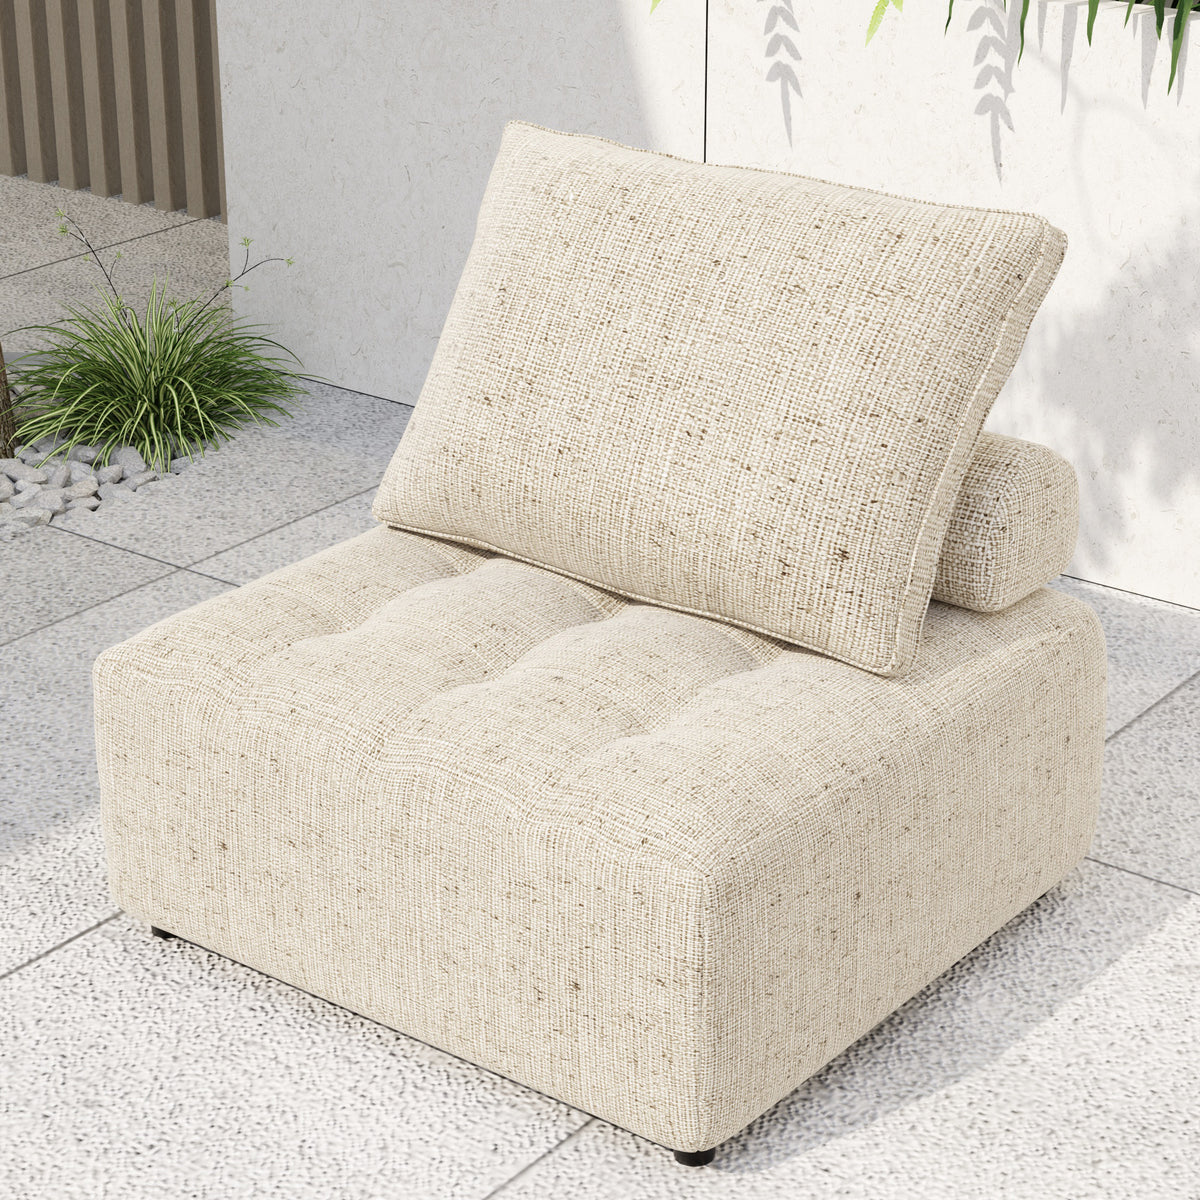 Bellemave® Outdoor Modular Sofa, with Aluminum Structure, Support Cushion and Back Cushion Cover-Removable, Fade-resistant, Waterproof Sofa Cover Included Bellemave®